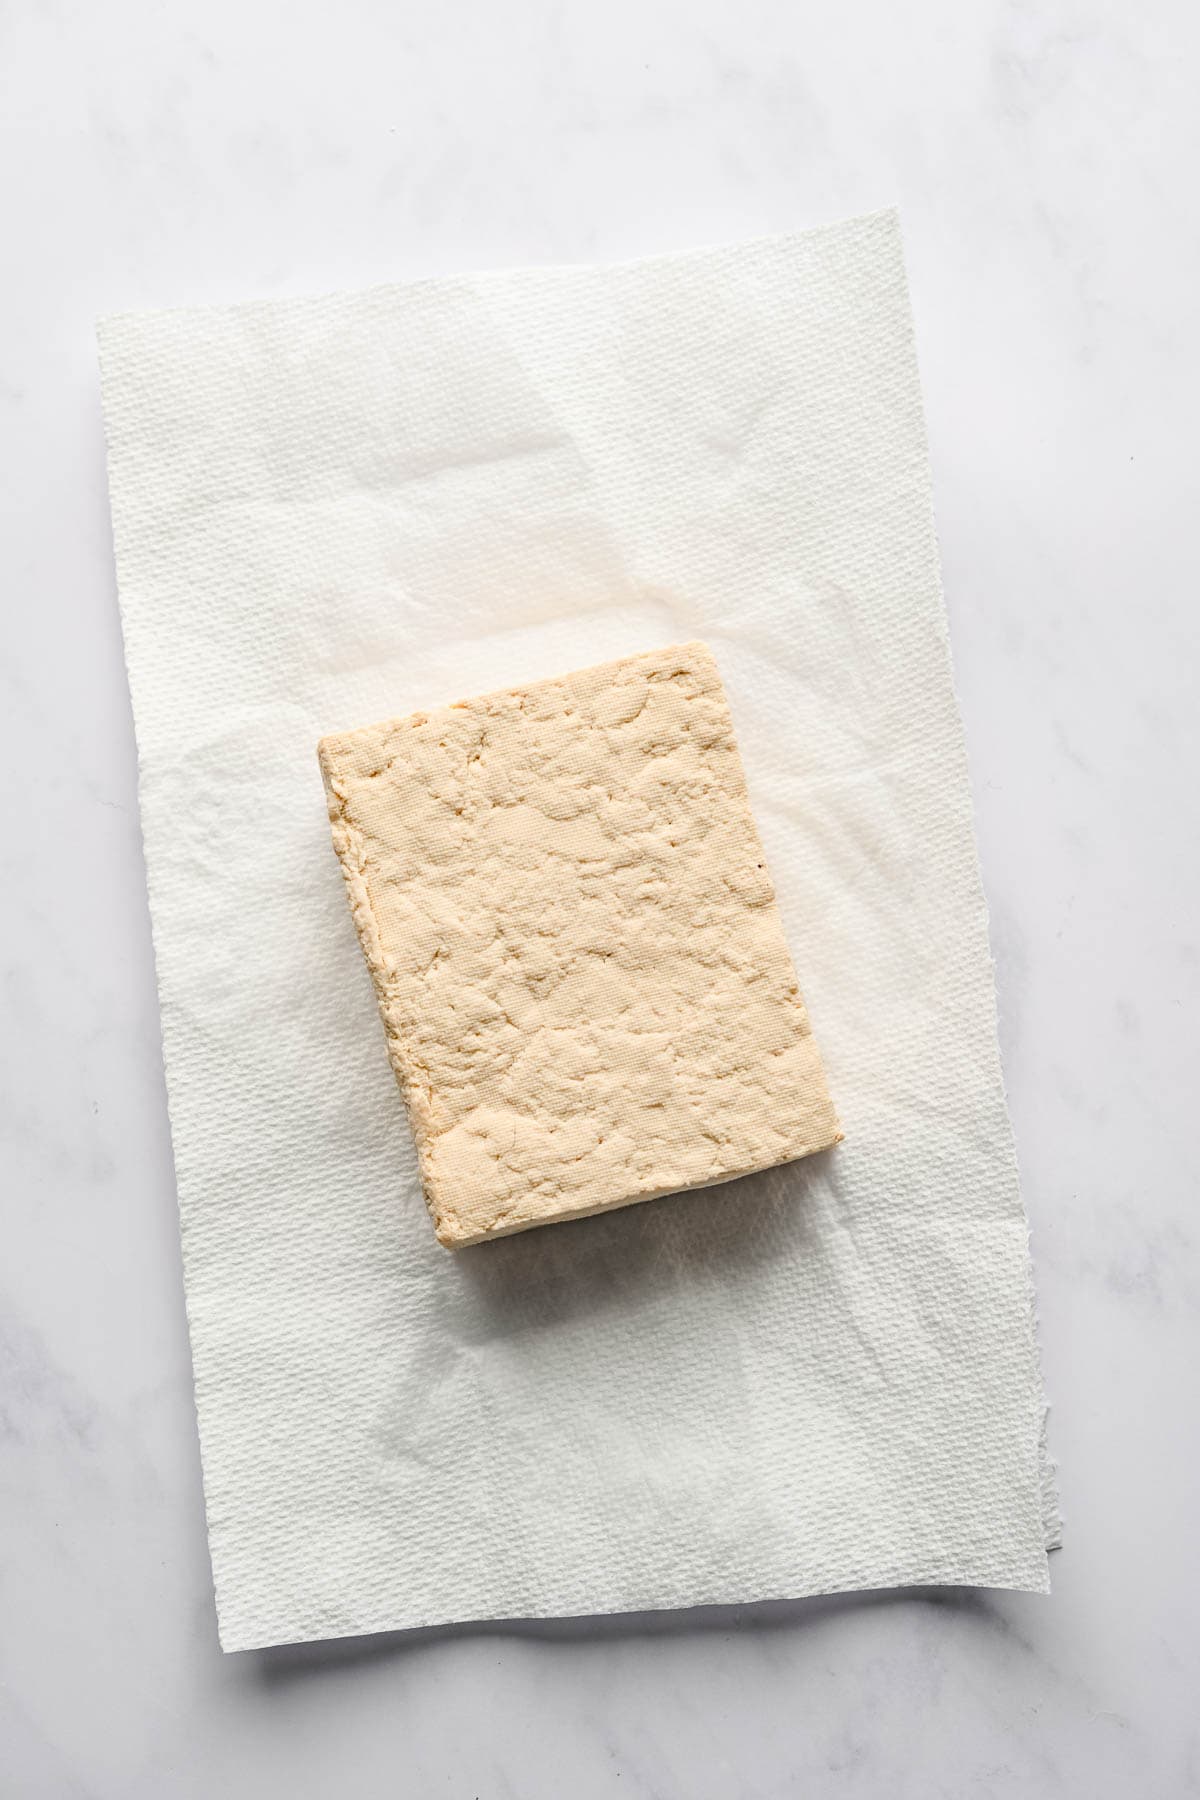 A block of tofu on a piece of paper towel.